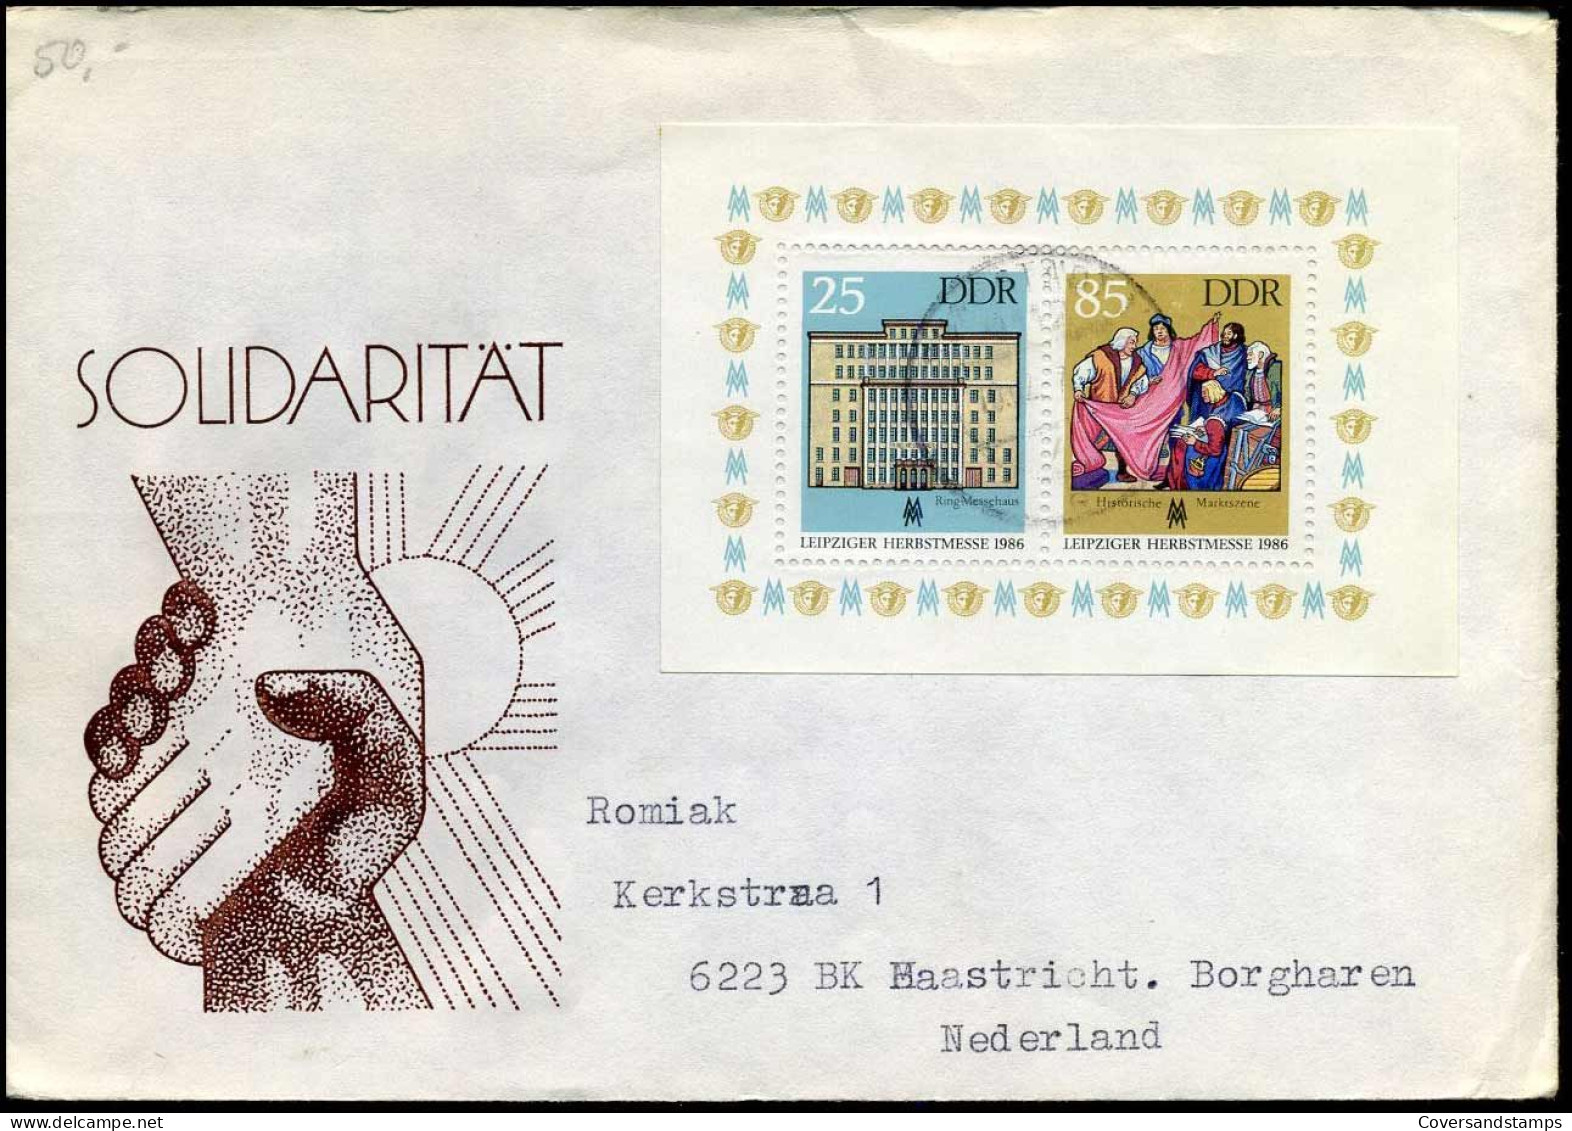 Cover To Maastricht, Netherlands - Storia Postale